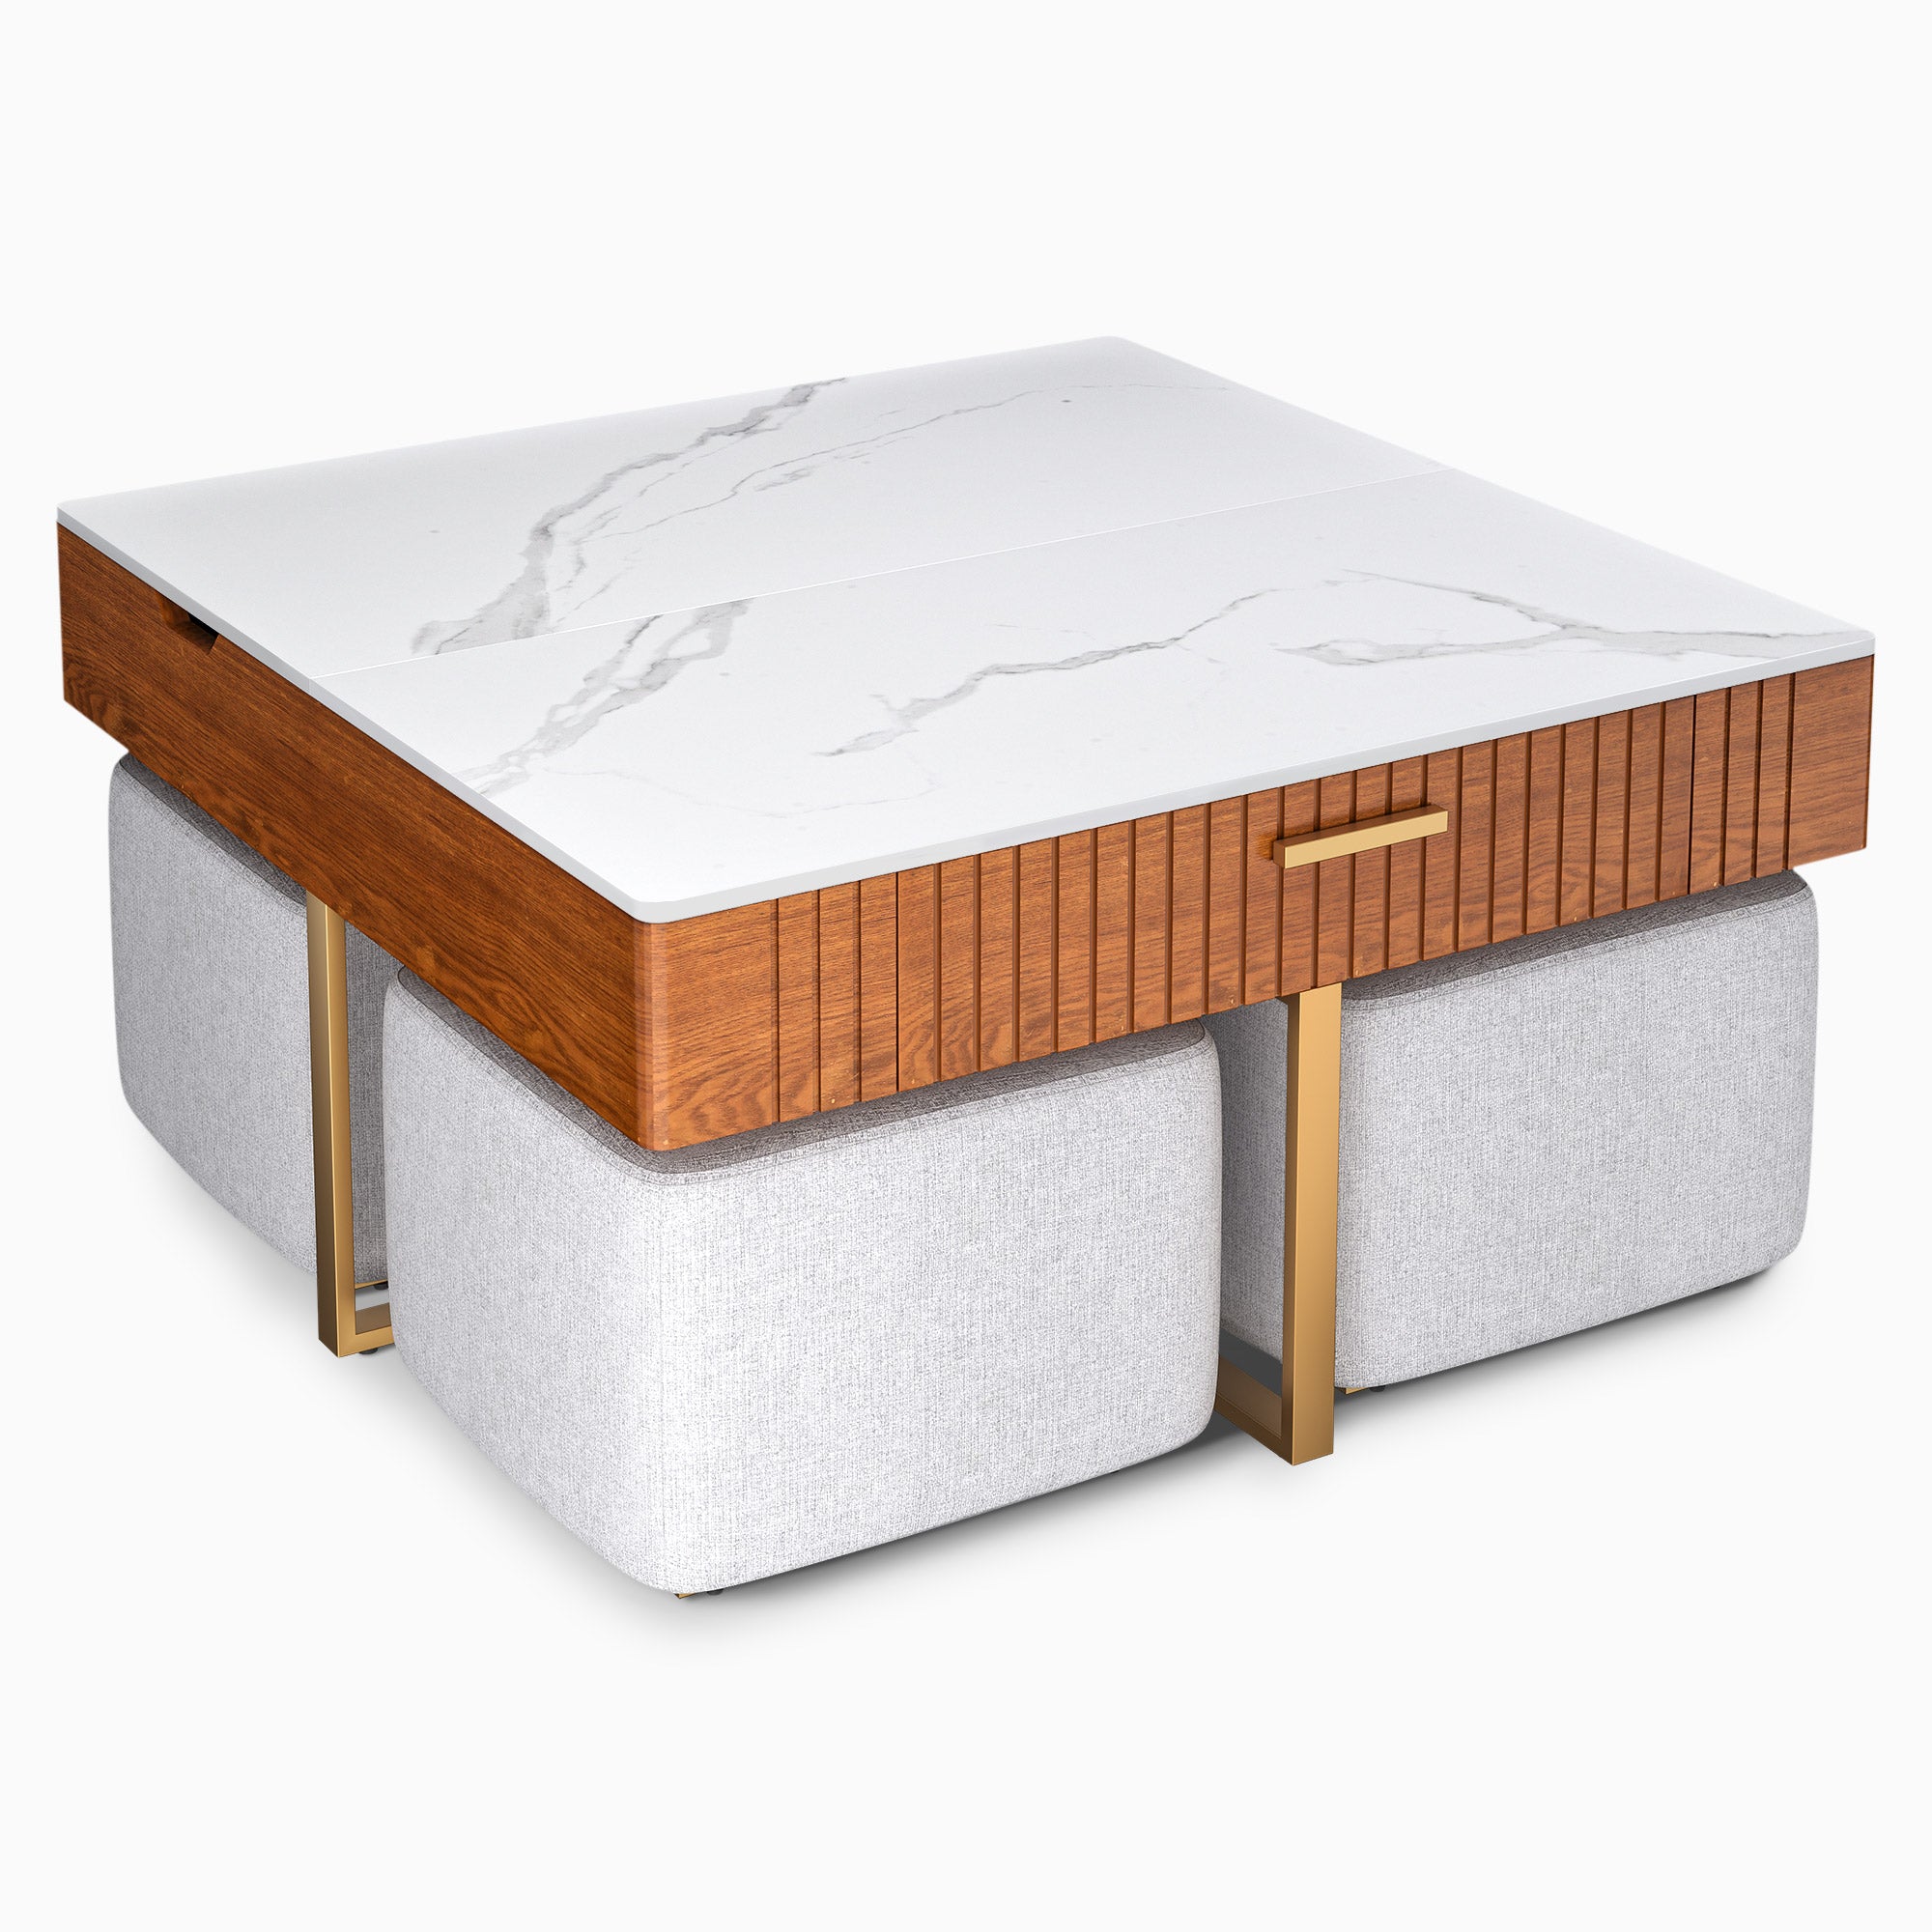 Odette 35.4" Marble Lift Top Coffee Table Set with 4 Fabric Stools & Drawer Storage, White & Natural